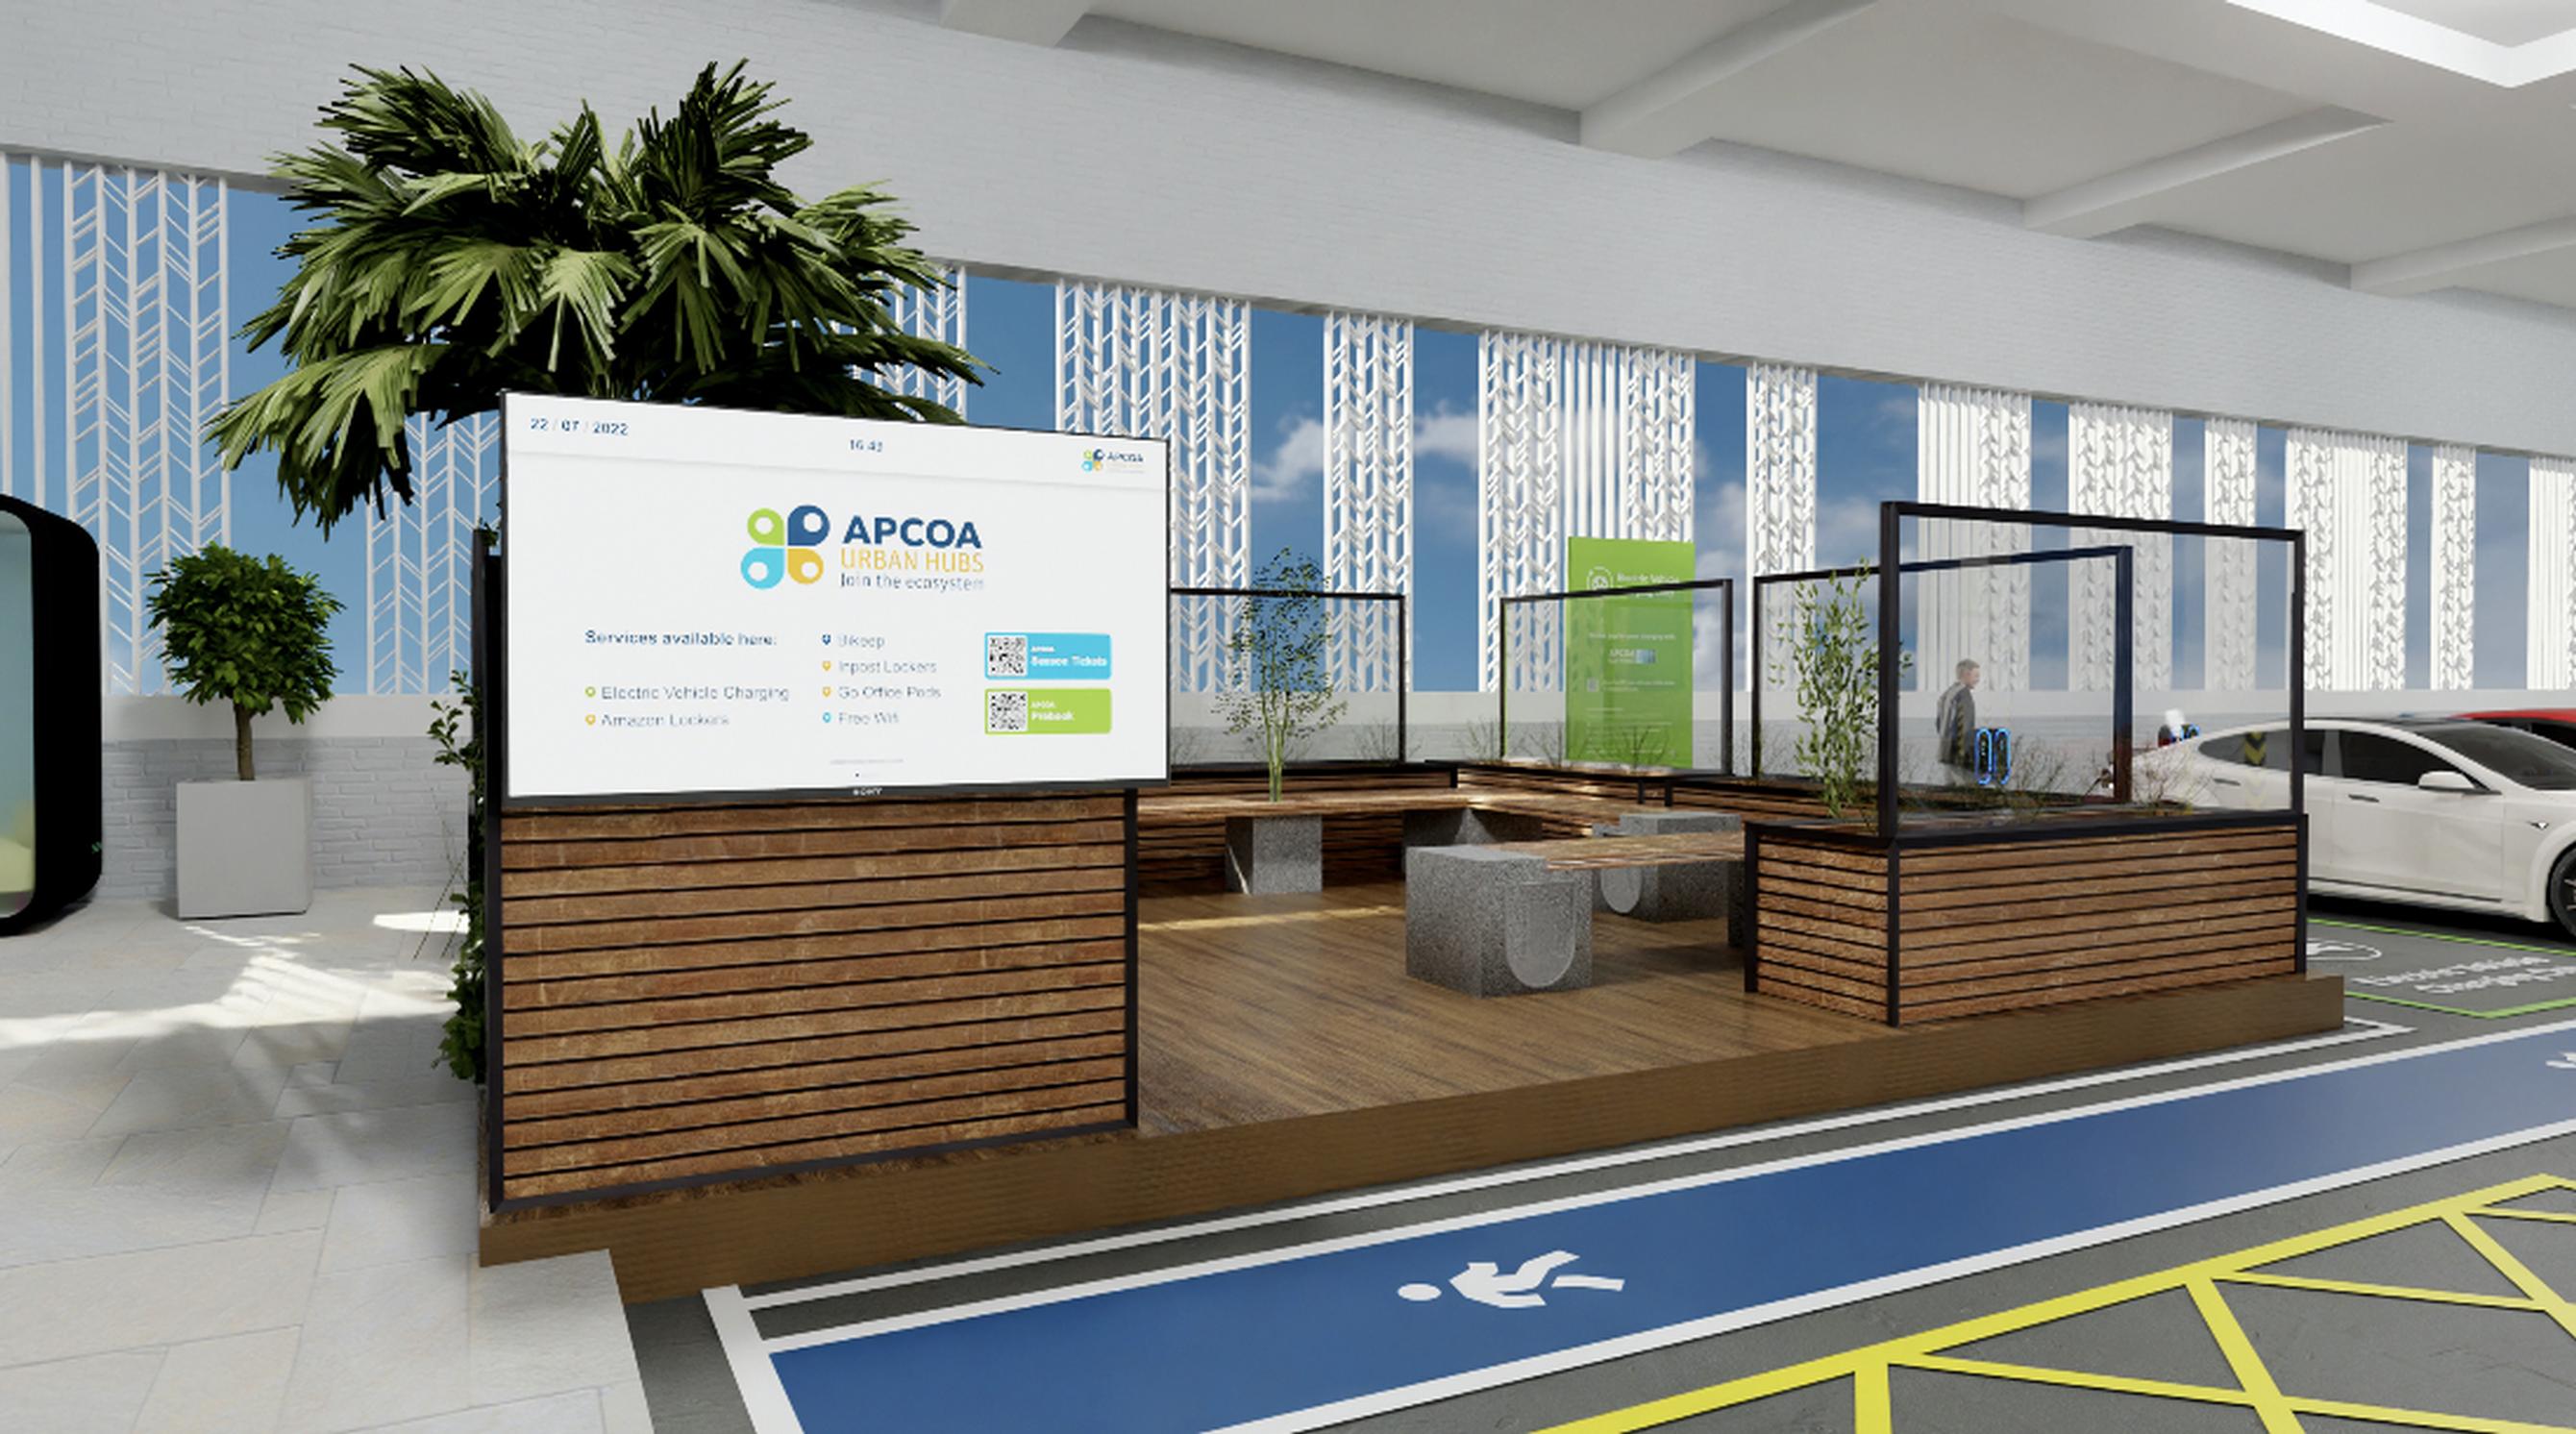 APCOA Urban Mobility Hubs will feature screened seating areas